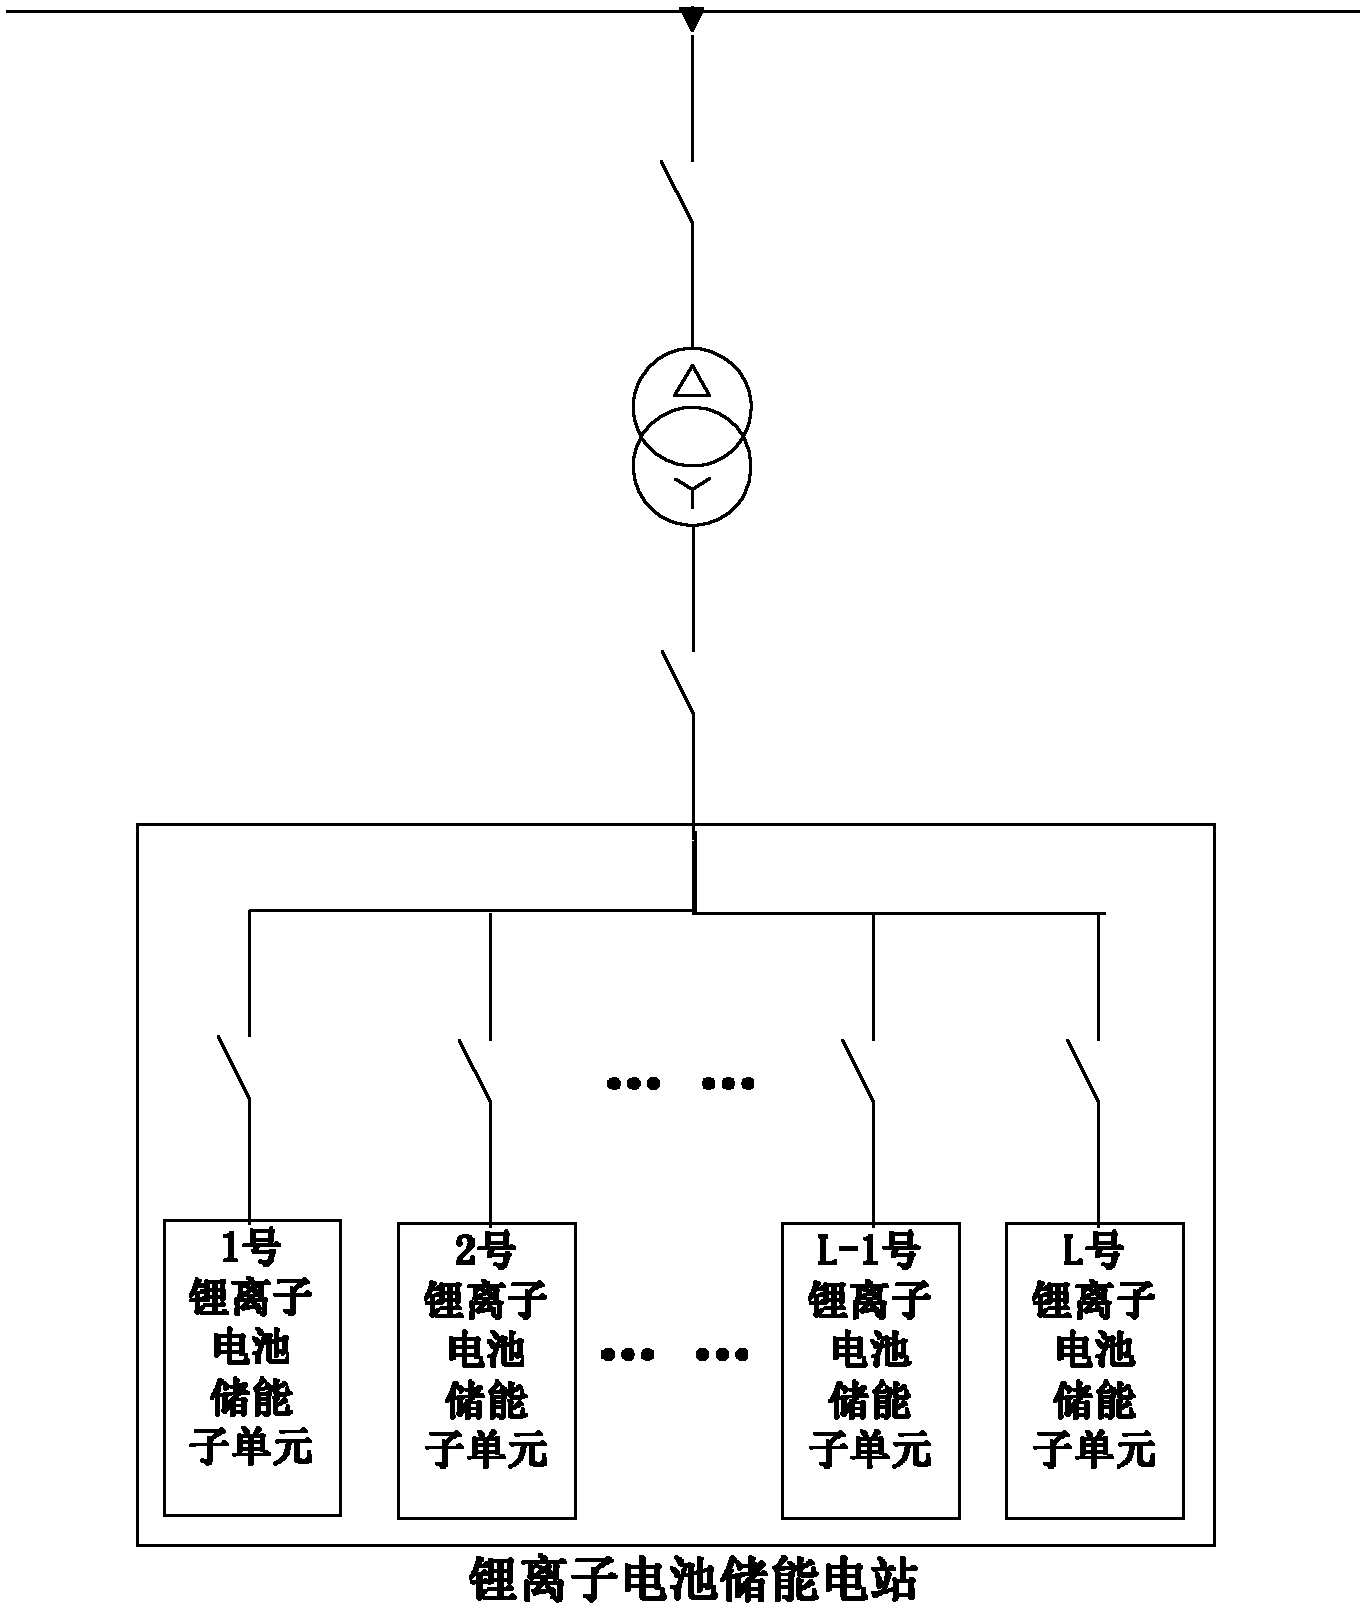 Megawatt battery energy storage power station real-time power control method and system thereof